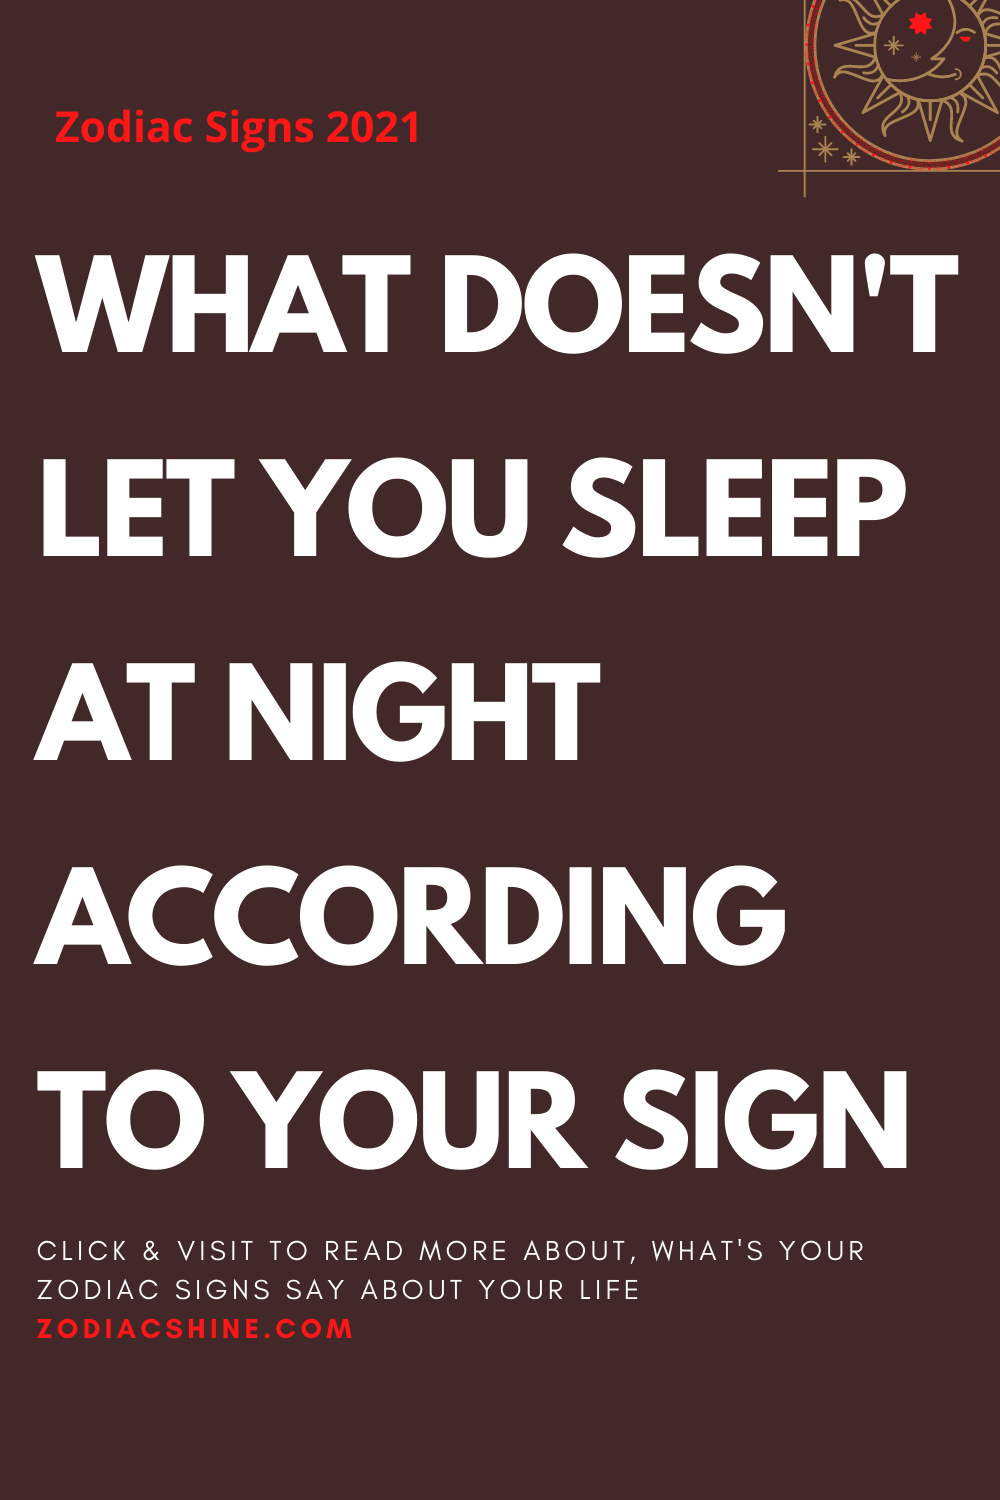 WHAT DOESN’T LET YOU SLEEP AT NIGHT ACCORDING TO YOUR SIGN